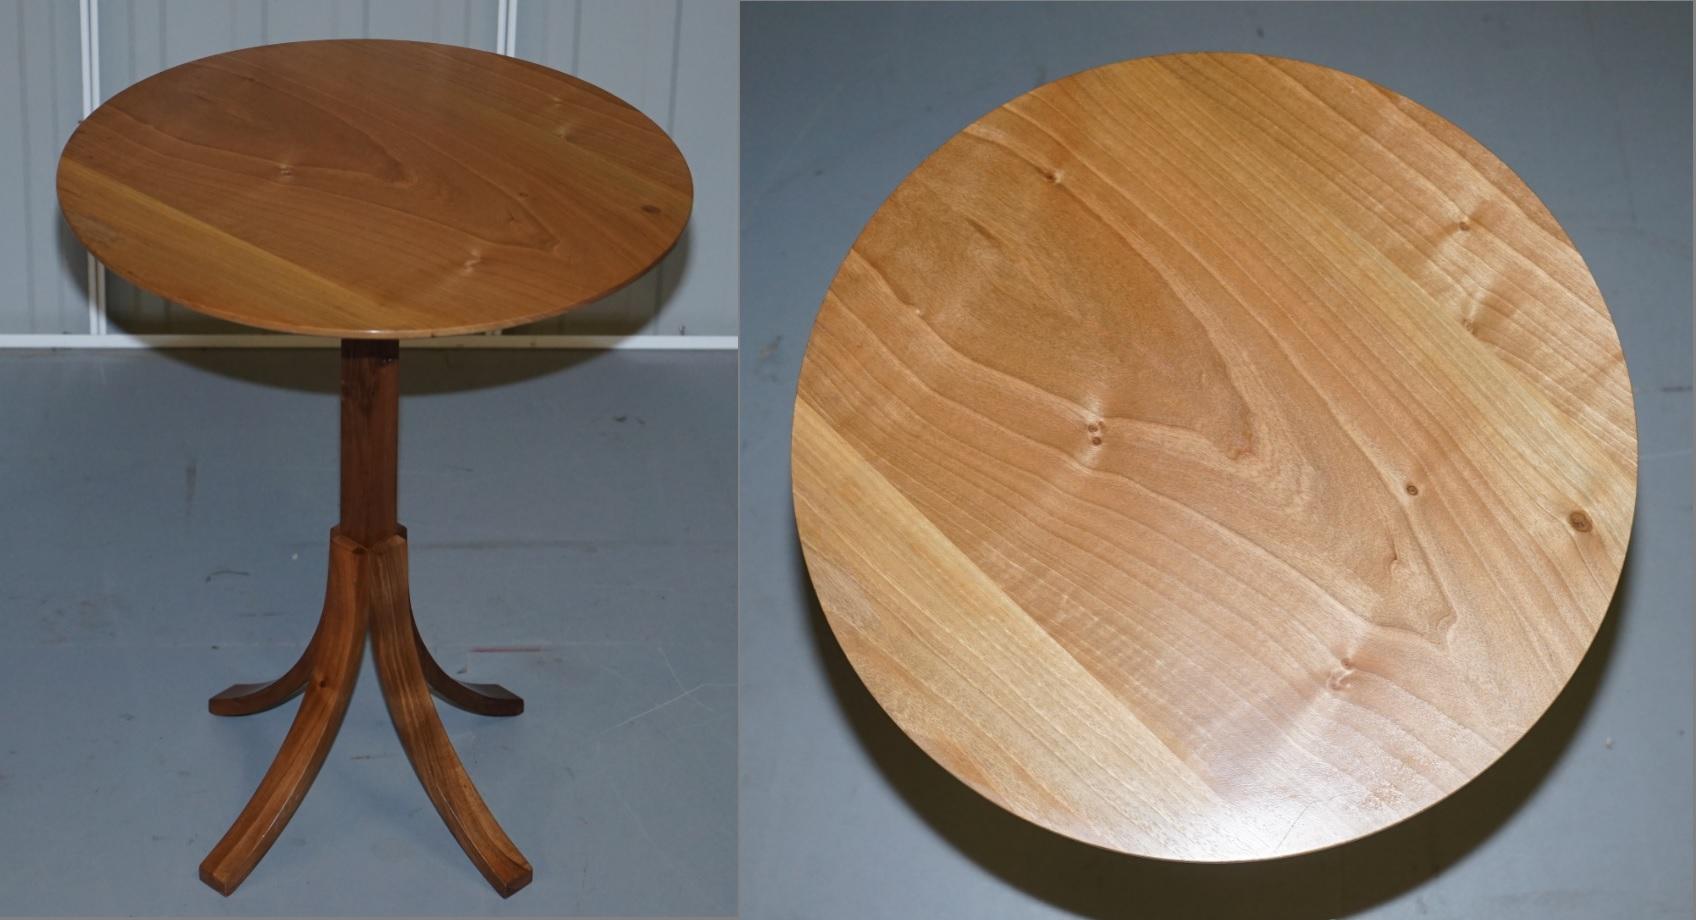 We are delighted to offer for sale this stunning hand made in England designer Houlgate & Pack walnut side table

Nick Holgate and Andy Pack have been designing and making furniture since 1985, having previously spent many years sailing and